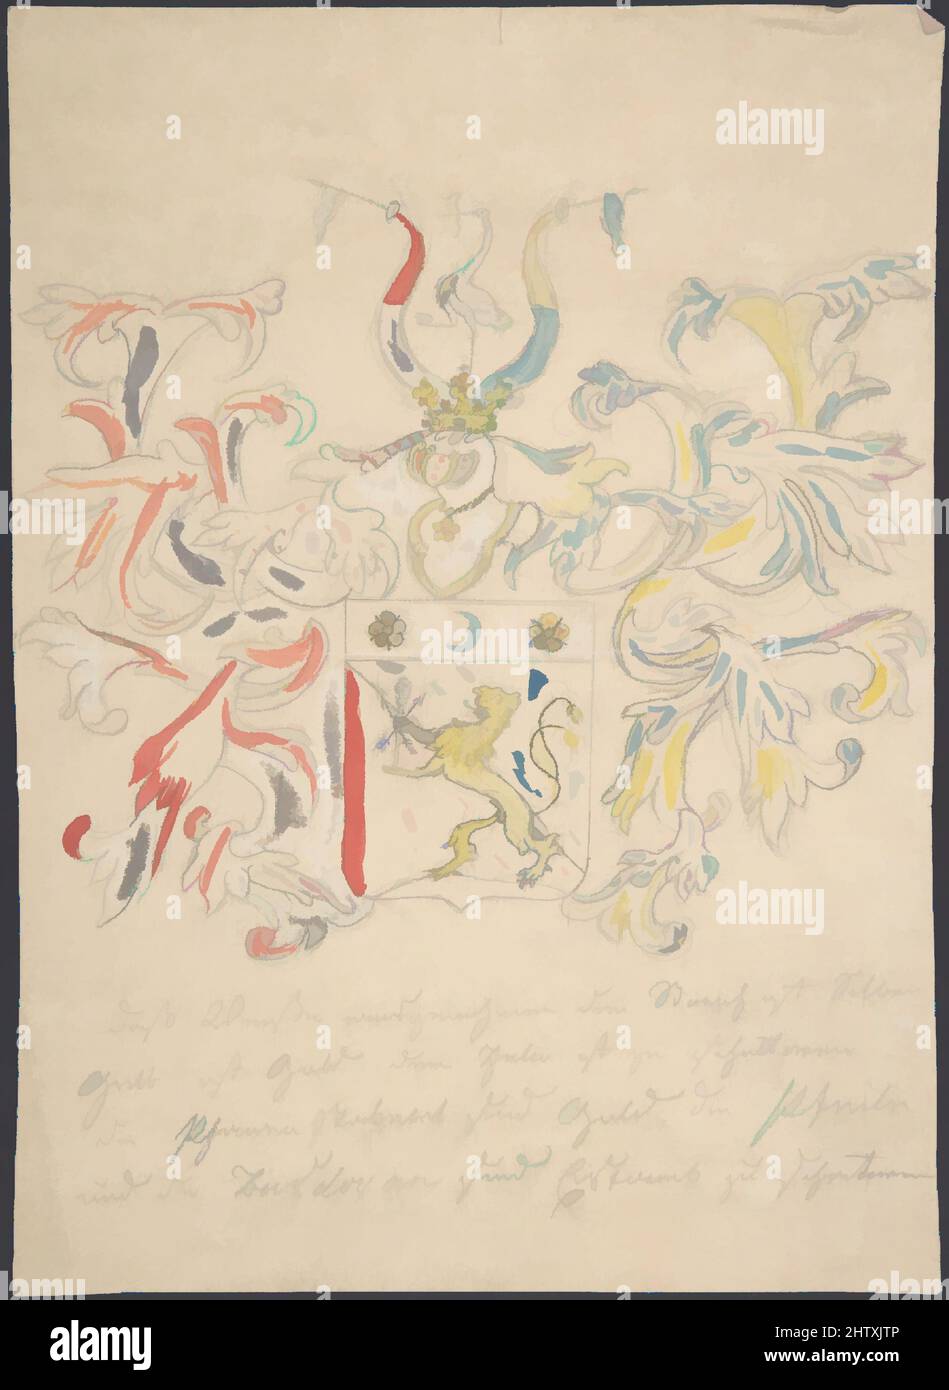 Art inspired by Design for coat of arms, 18th century, Graphite and watercolor, sheet: 10 3/16 x 7 5/16 in. (25.9 x 18.6 cm), Drawings, Anonymous, 18th century, Classic works modernized by Artotop with a splash of modernity. Shapes, color and value, eye-catching visual impact on art. Emotions through freedom of artworks in a contemporary way. A timeless message pursuing a wildly creative new direction. Artists turning to the digital medium and creating the Artotop NFT Stock Photo